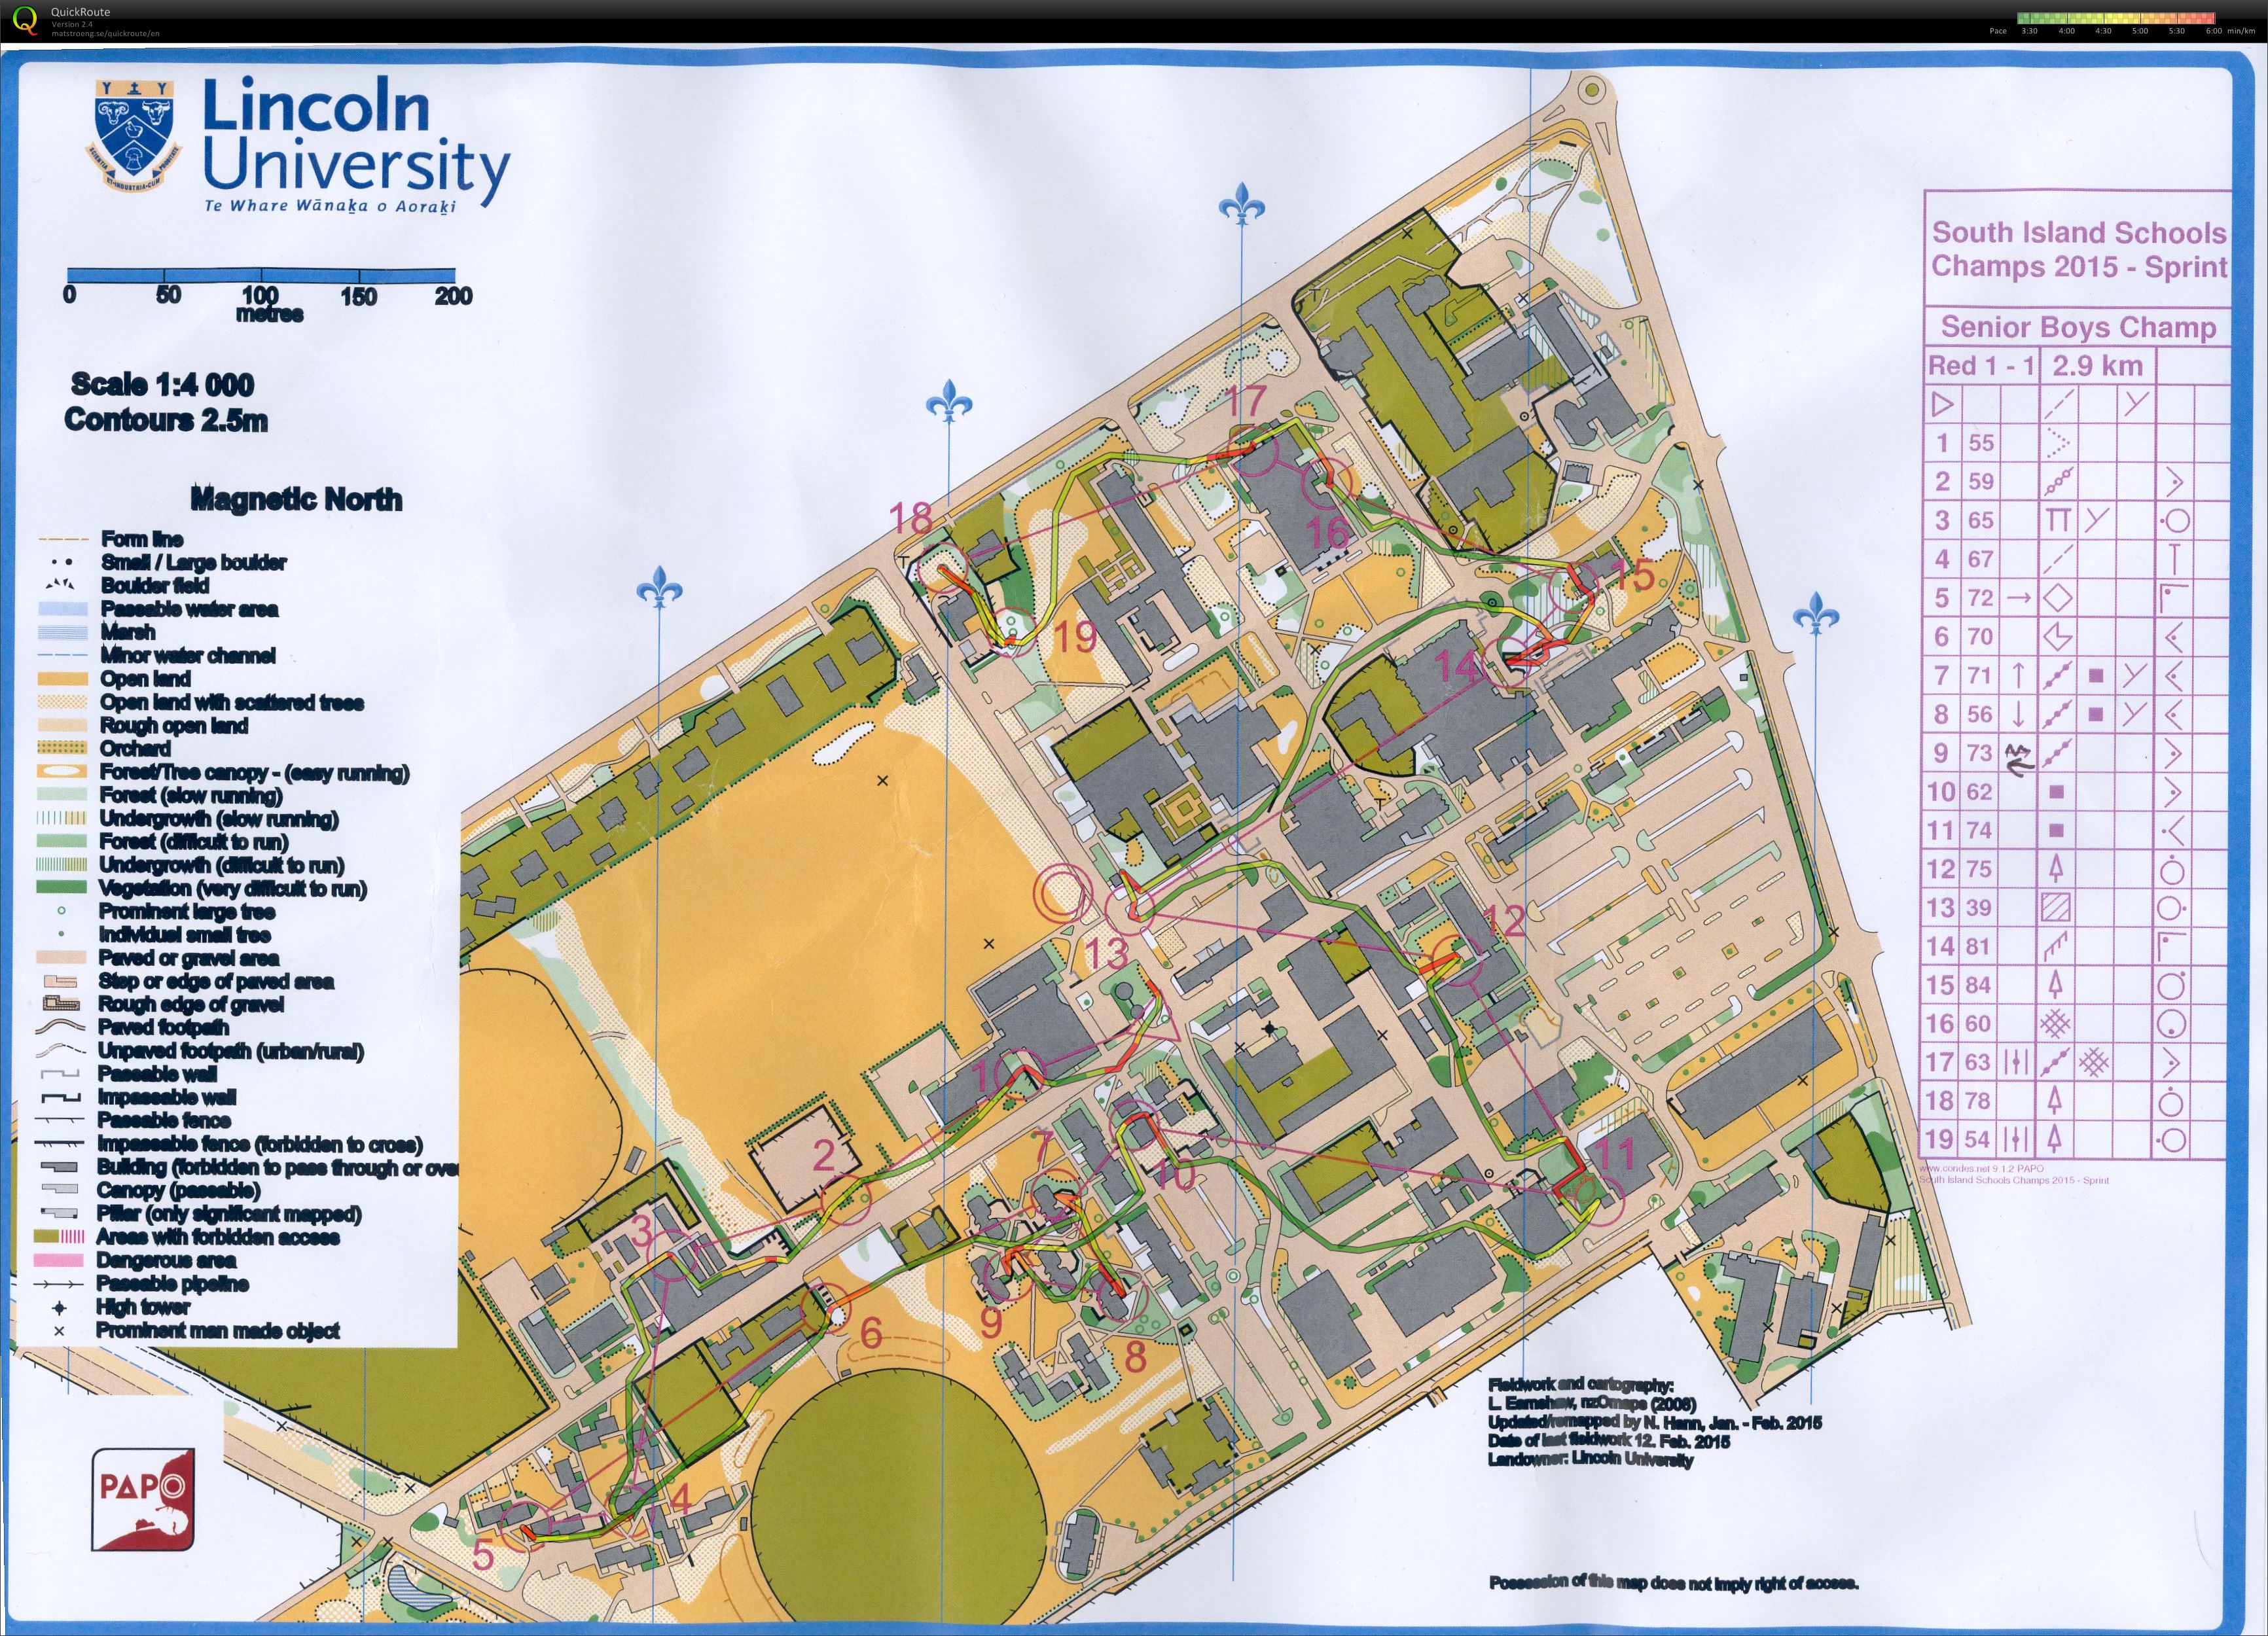 SISS Sprint Champs - Map 1 (19/04/2015)